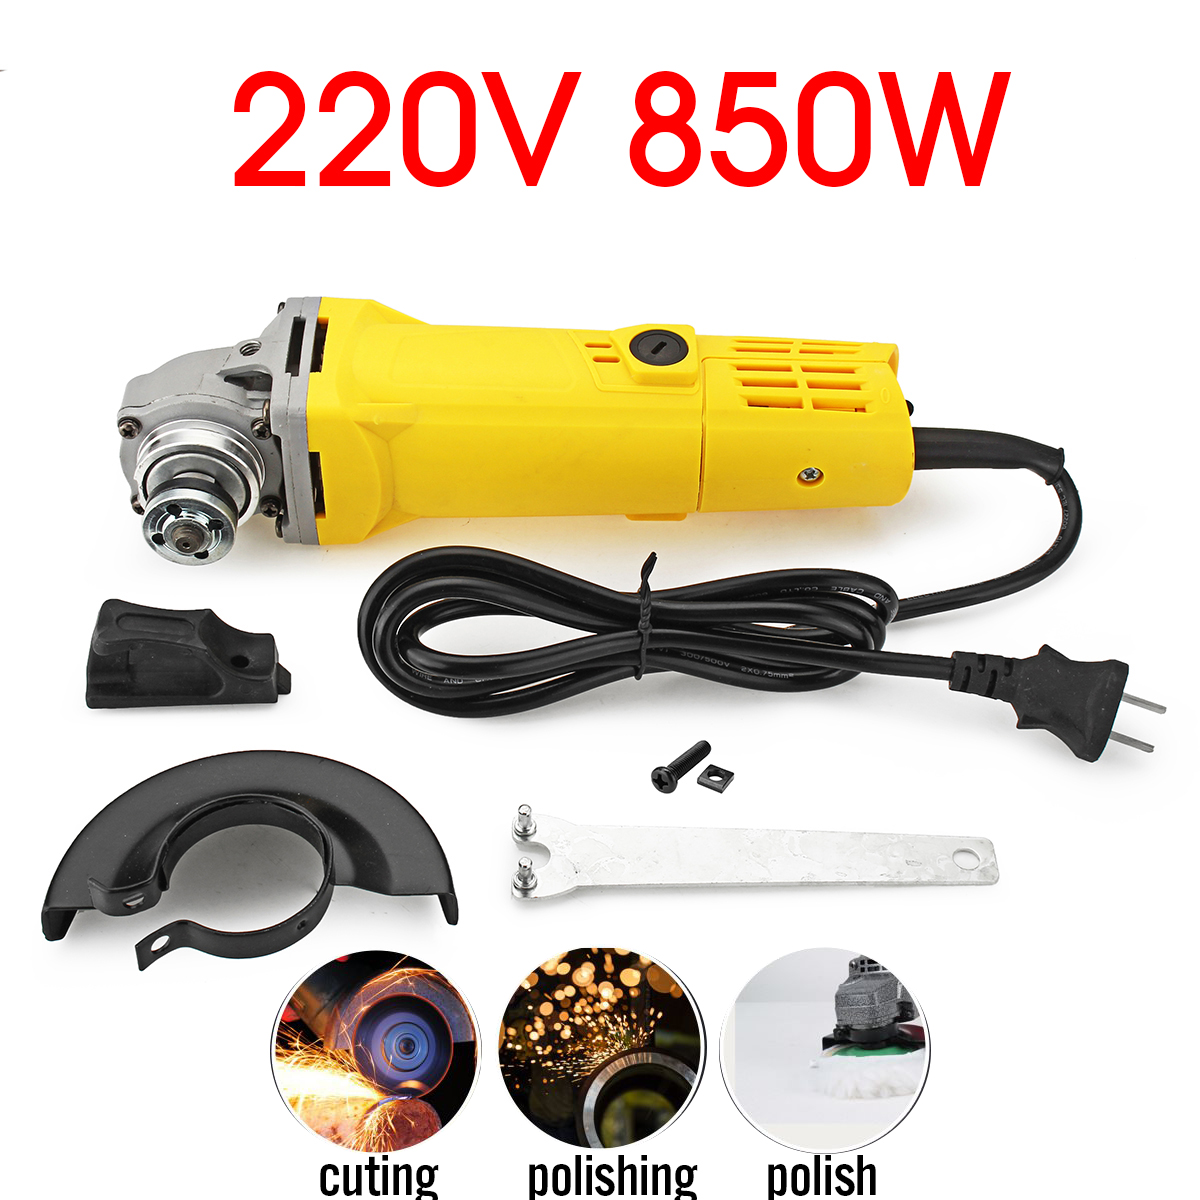 100mm-850W-220V-Portable-Electric-Angle-Grinder-Muti-Function-Household-Polish-Machine-Grinding-Cutt-1391941-3